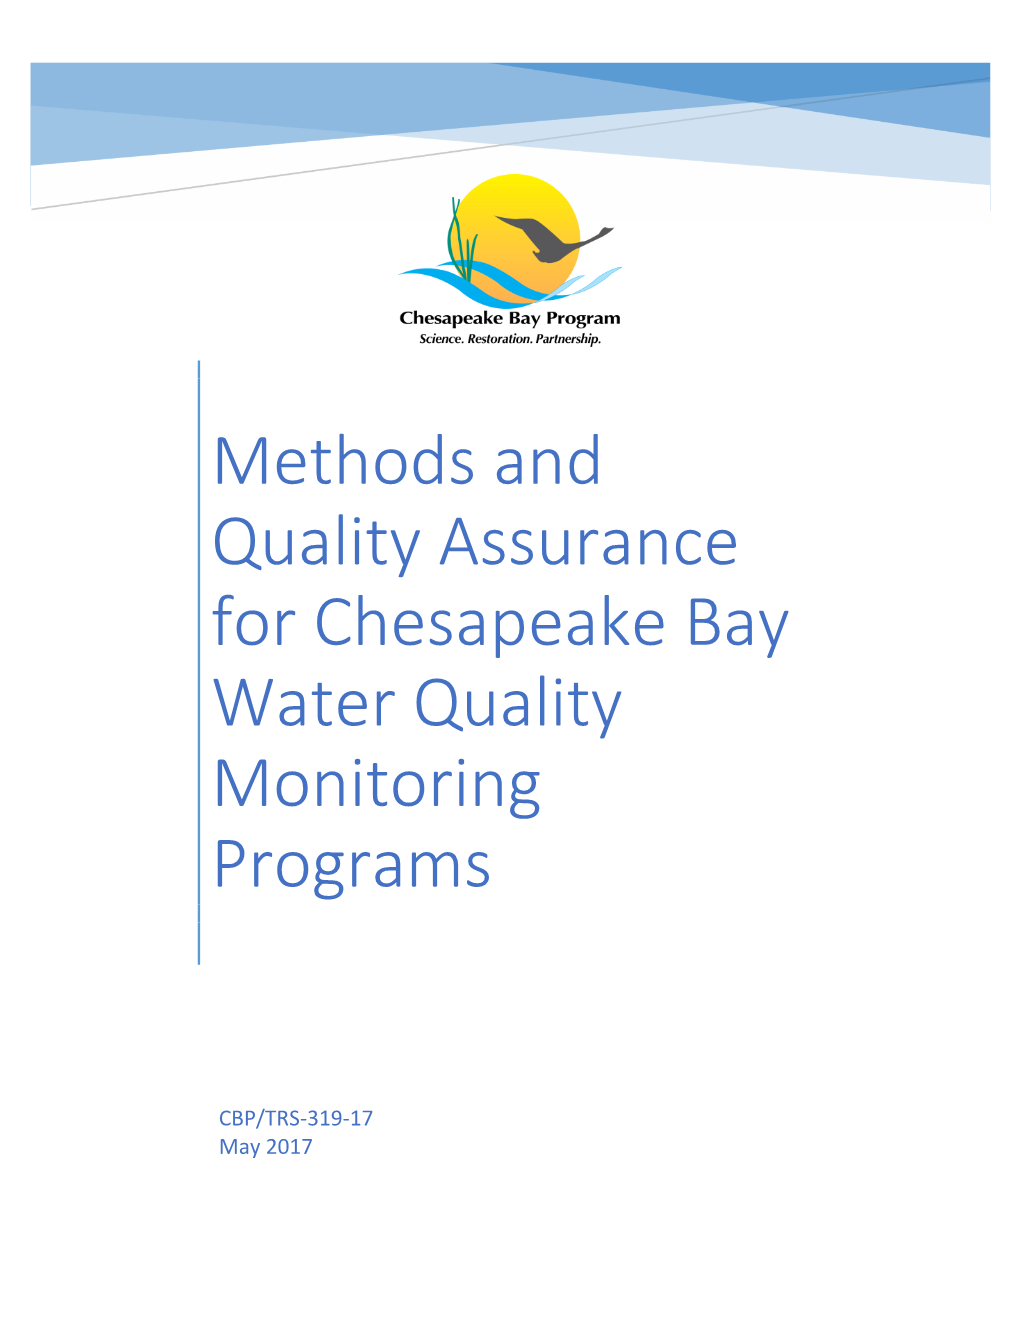 Methods and Quality Assurance for Chesapeake Bay Water Quality Monitoring Programs